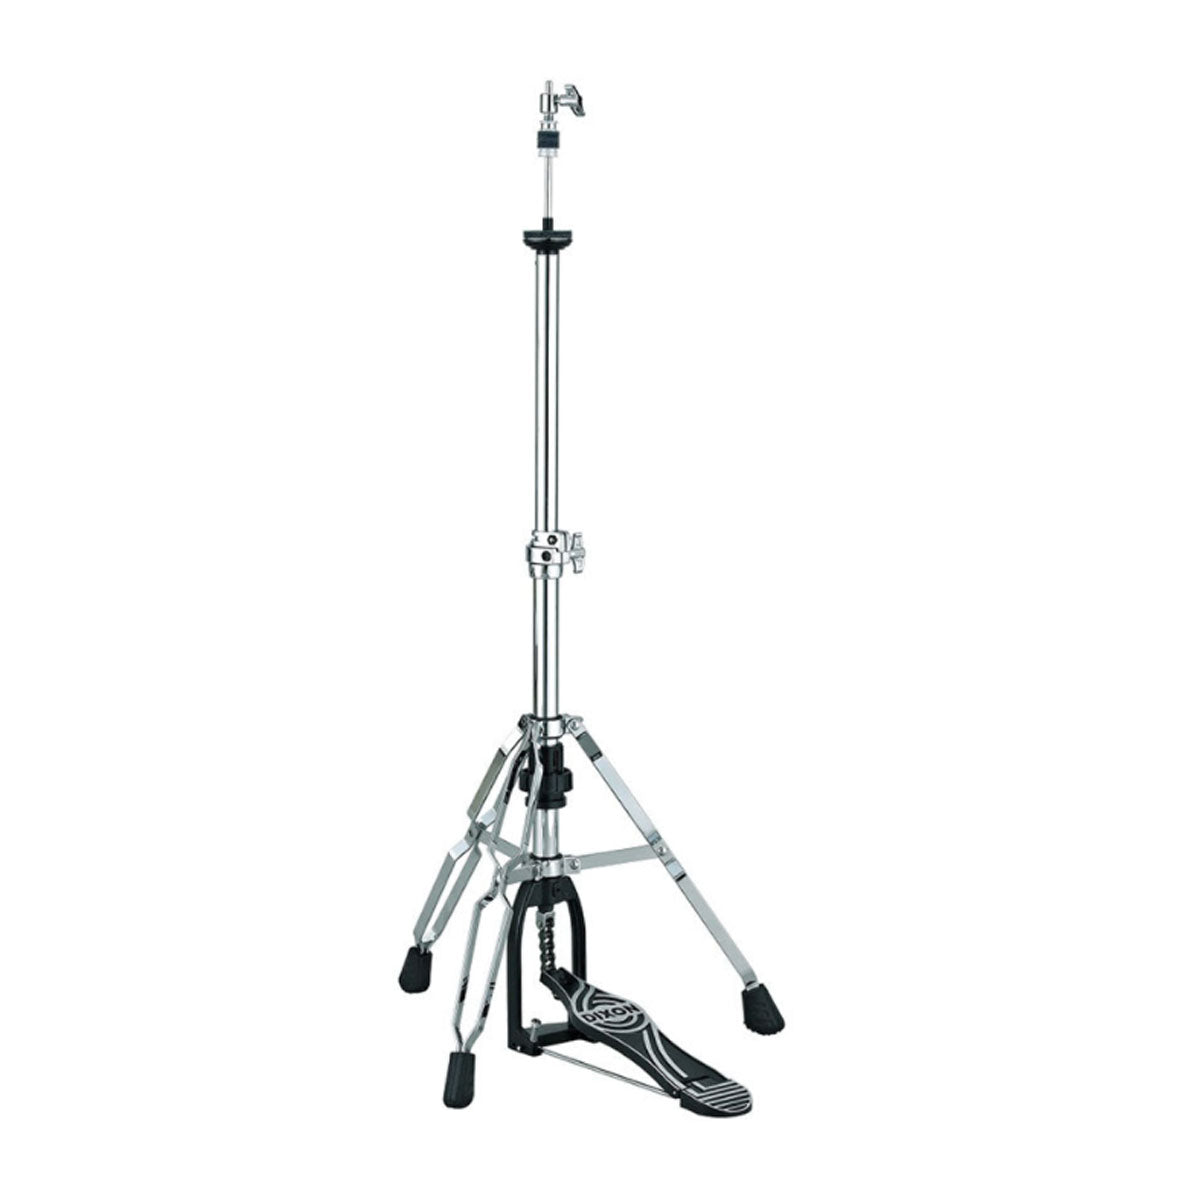 Dixon 9290 Series Hi Hat Stand Heavy-Weight Double Braced - PSH9290